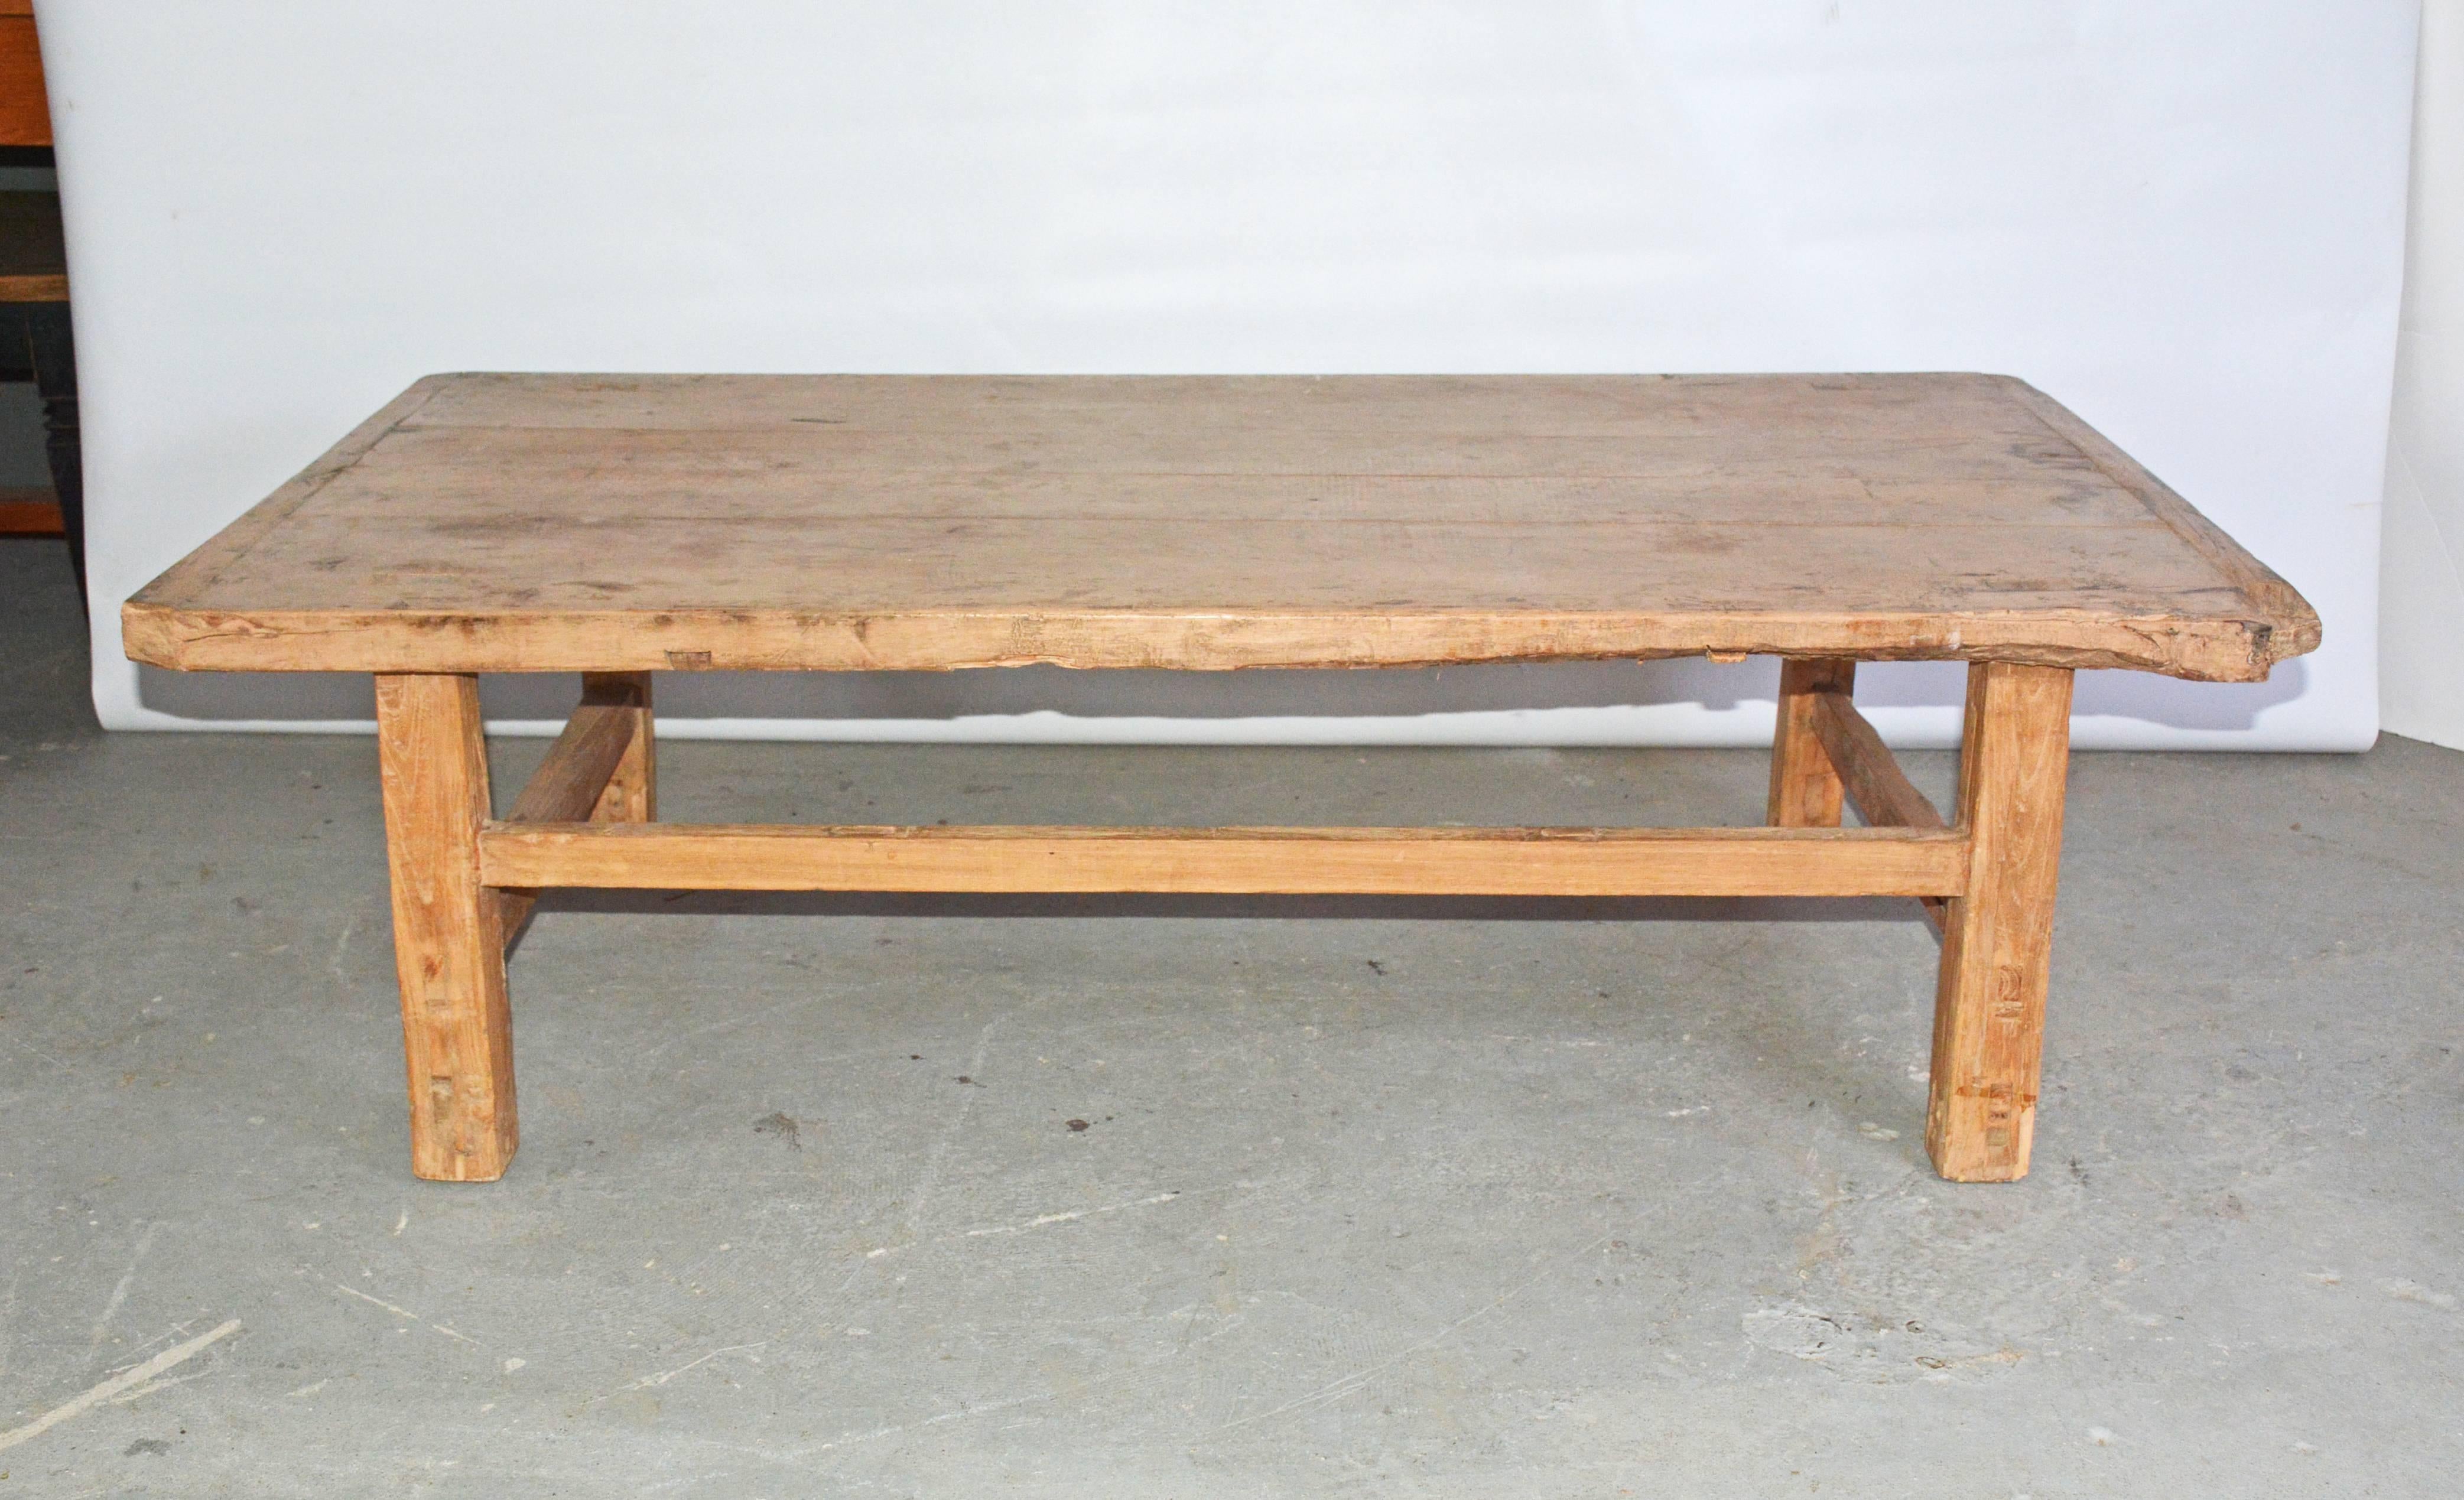 The rustic plank top coffee table has legs secured by stretchers placed at two heights. Top has a wonderful aged patina with breadboard ends.